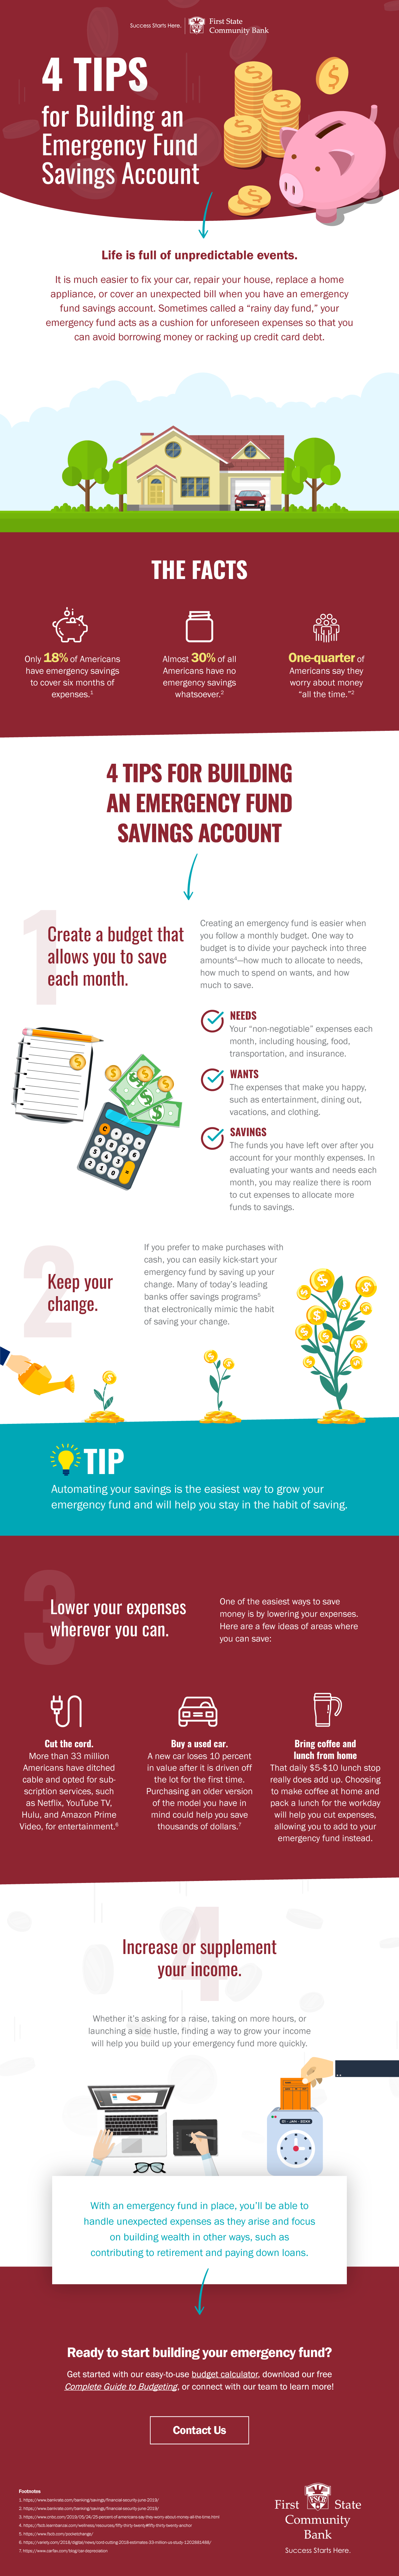 Infographic 4 Tips for Building an Emergency Fund